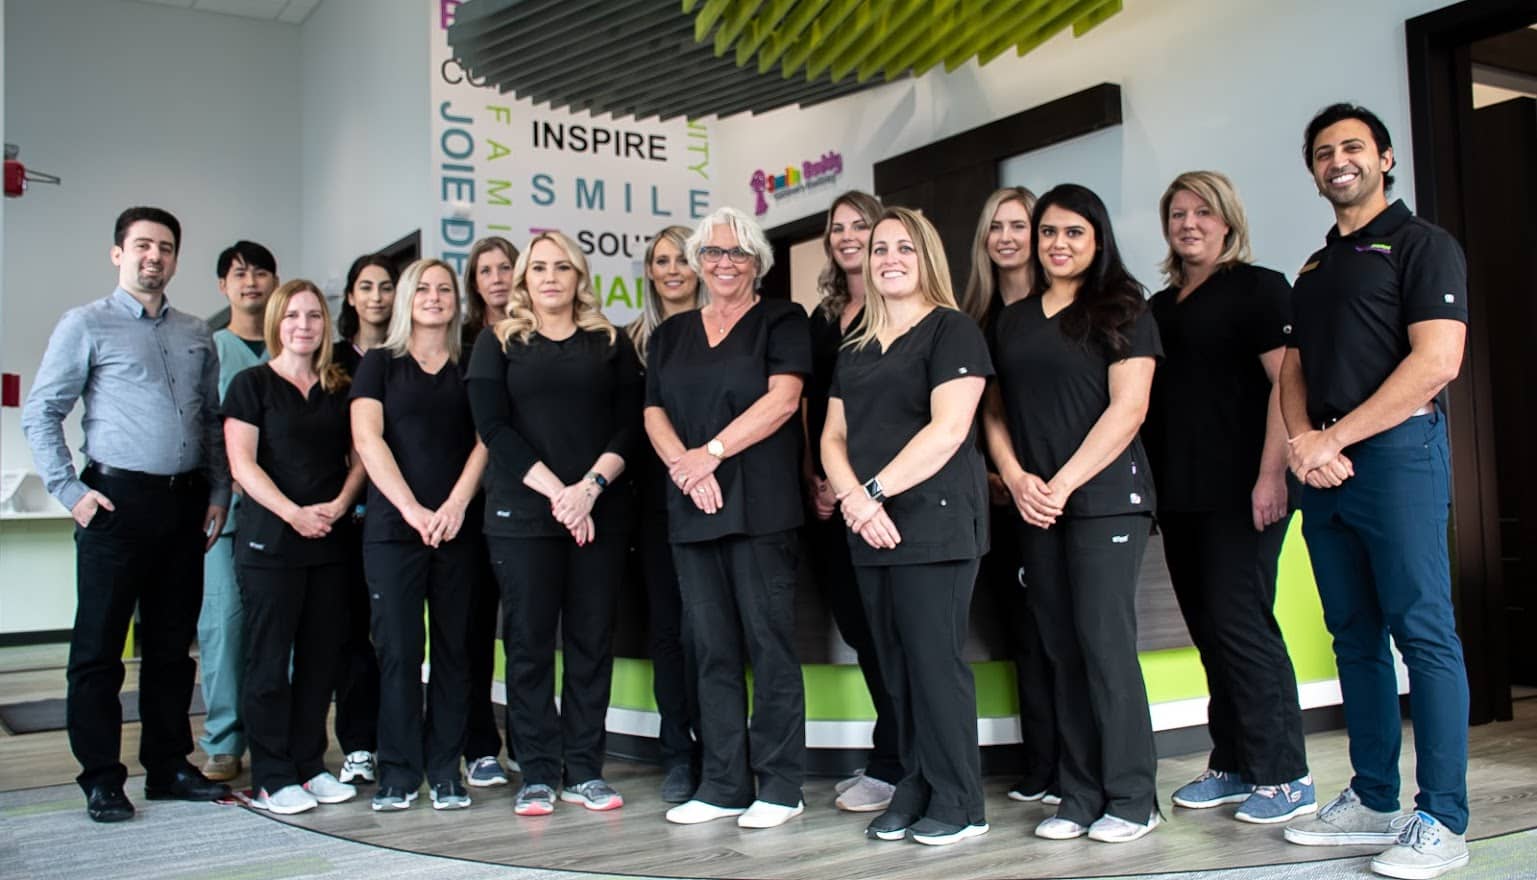 Group photo of 15 Hometown Orthodontics team members, posing together with smiles in front of a clinic backdrop